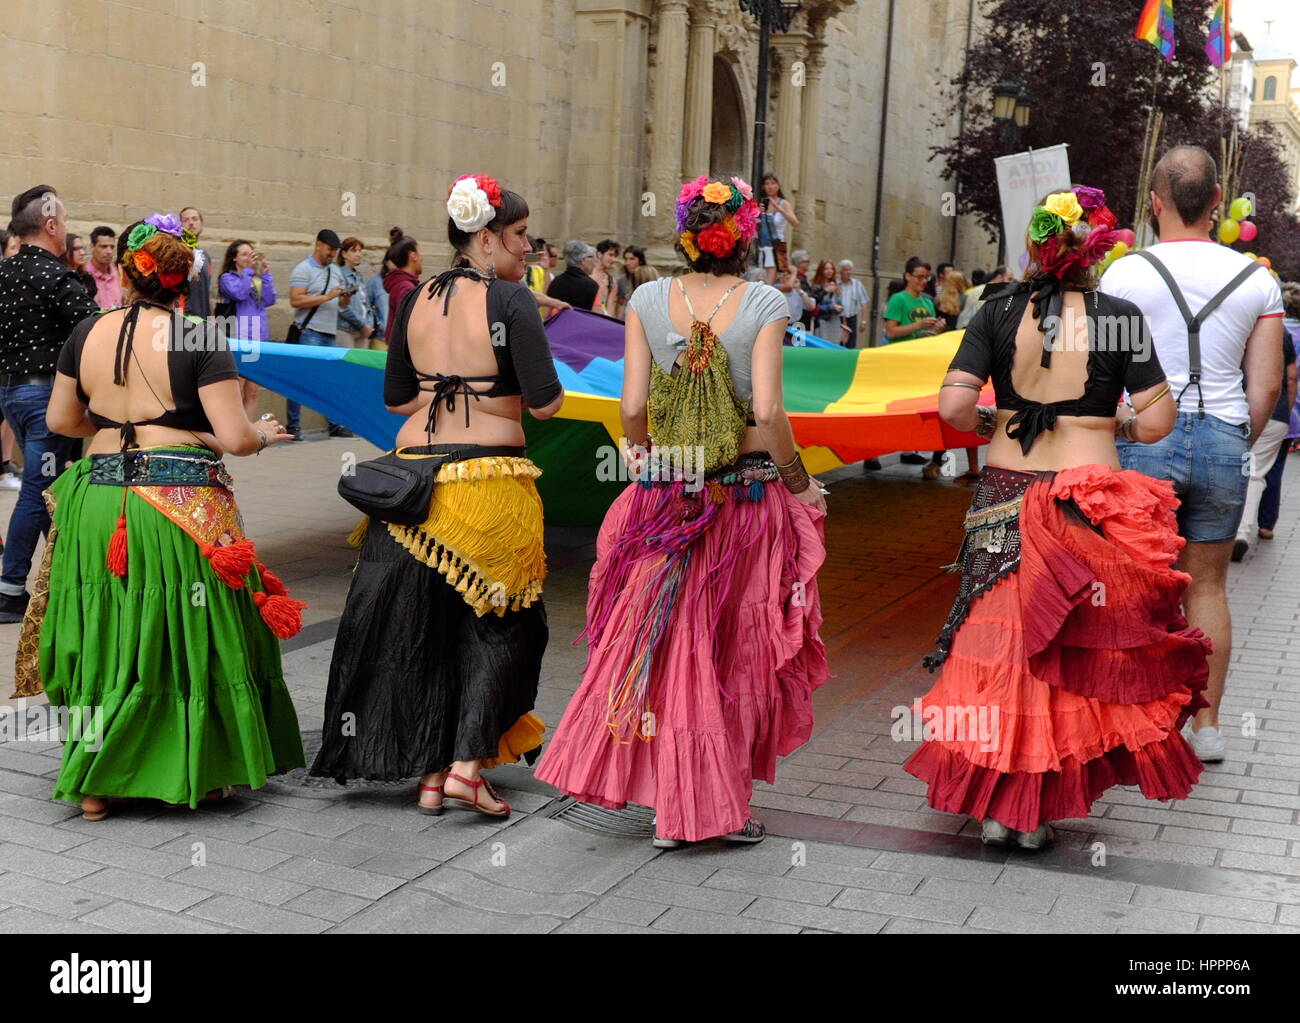 Participants in the 2017 LGBTQ Pride Parade in Logrono, Spain, carry the symbolic rainbow flag through the city. Stock Photo